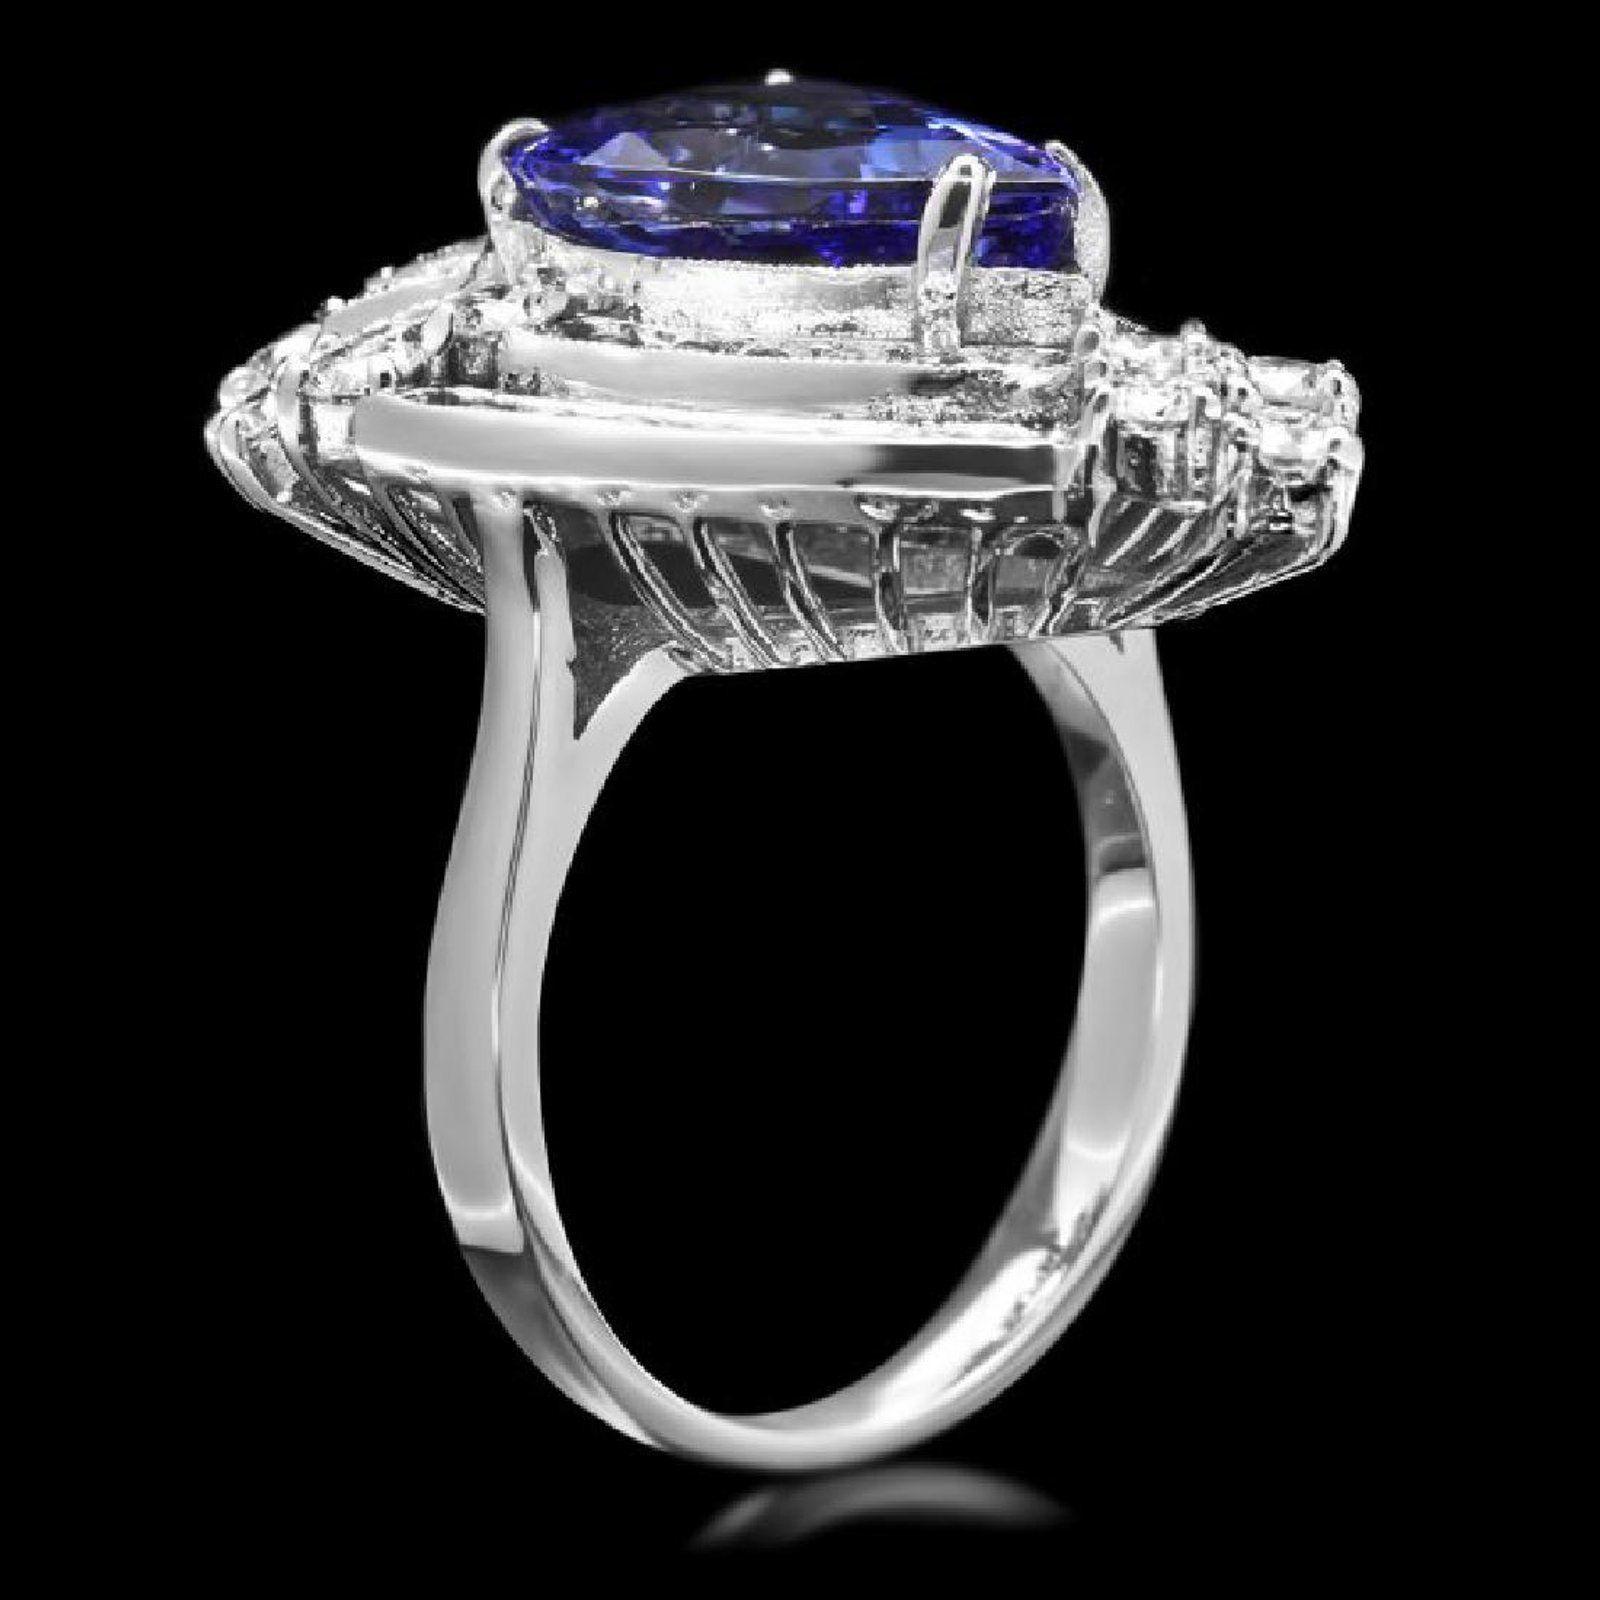 7.20 Carats Natural Very Nice Looking Tanzanite and Diamond 14K Solid White Gold Ring

Total Natural Pear Shaped Tanzanite Weight is: Approx. 5.00 Carats

Tanzanite Measures: Approx. 14.00 x 9.00mm

Natural Round Diamonds Weight: Approx. 2.20 Carats